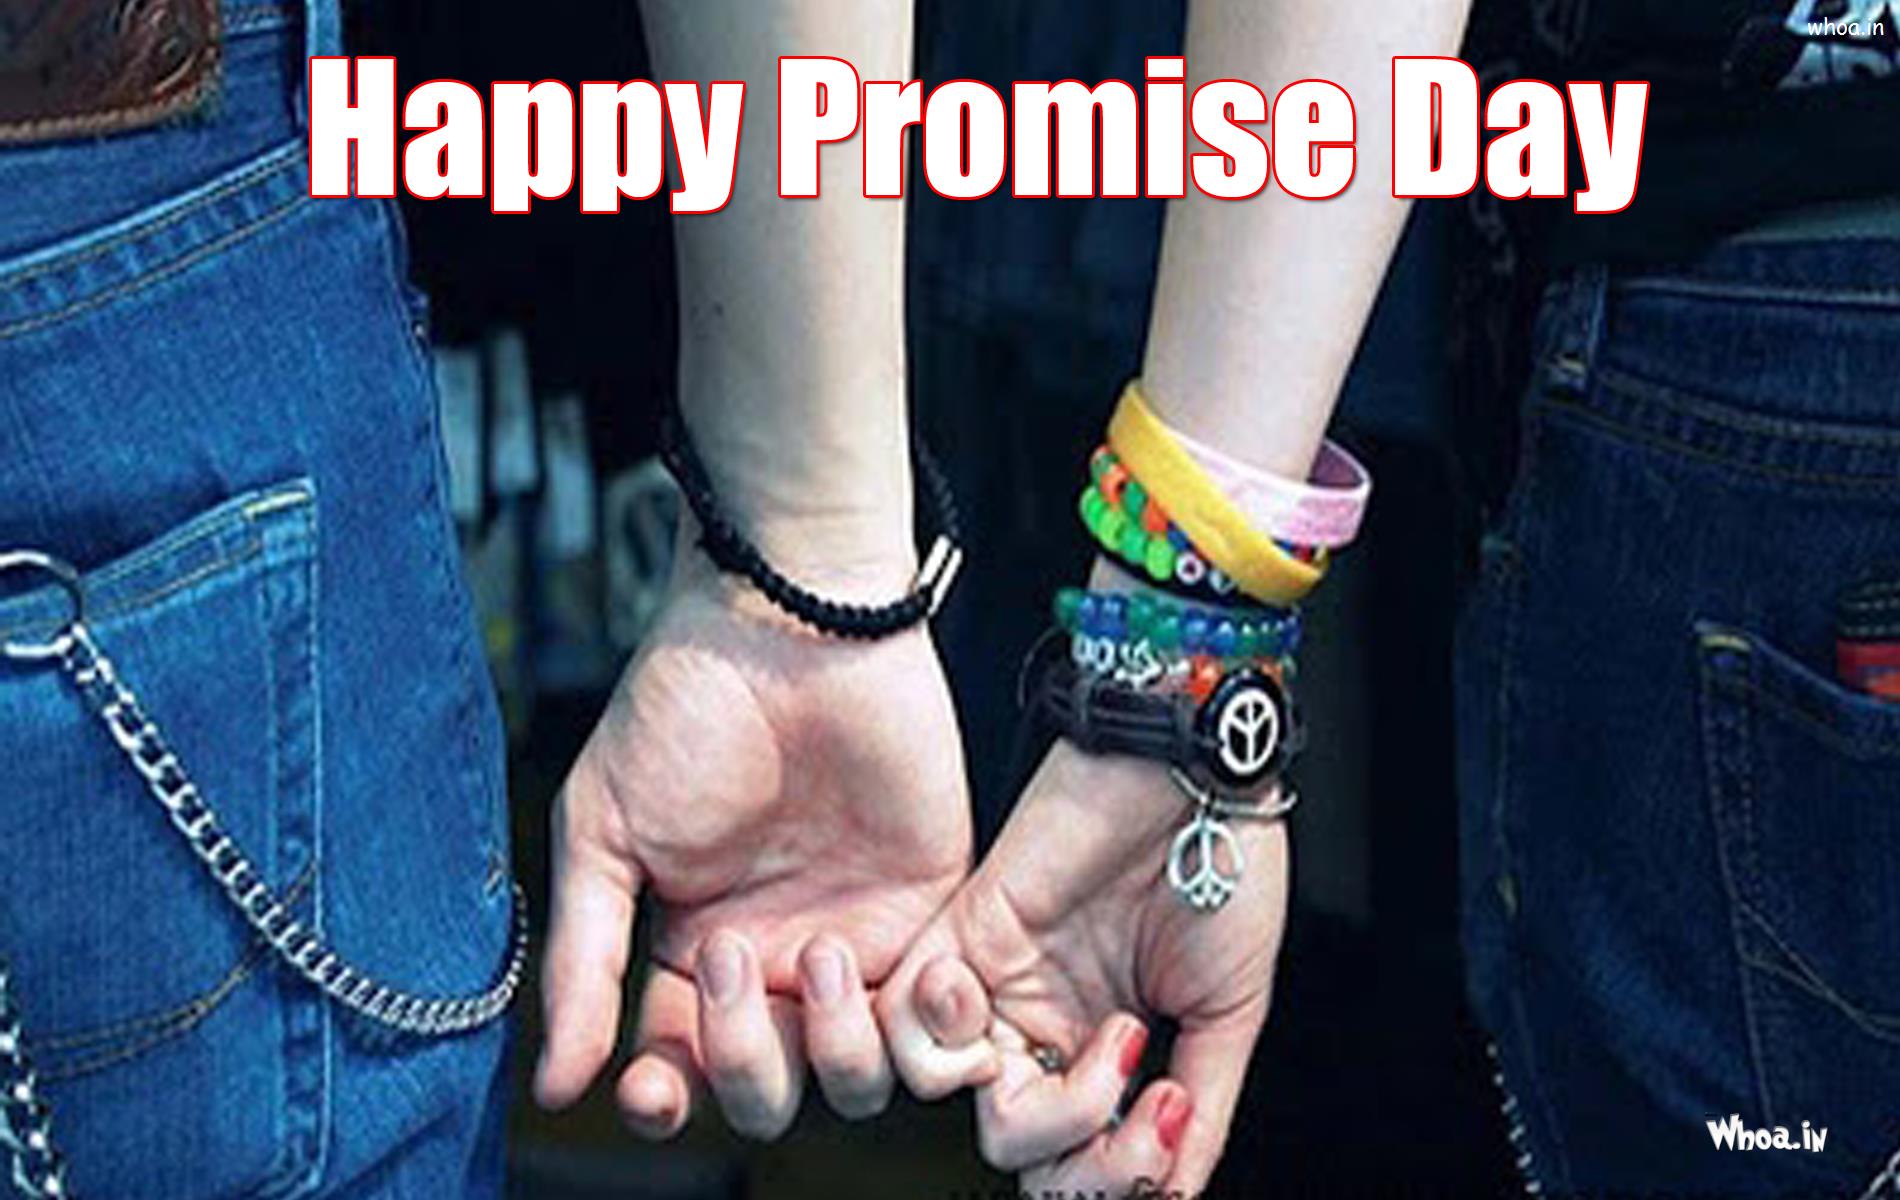 Download, Send, Promise Day Wishes, E-Greetings, Promise Day, Promise Day – 11 February, Happy Promise Day, Promise Day 2015, Promise